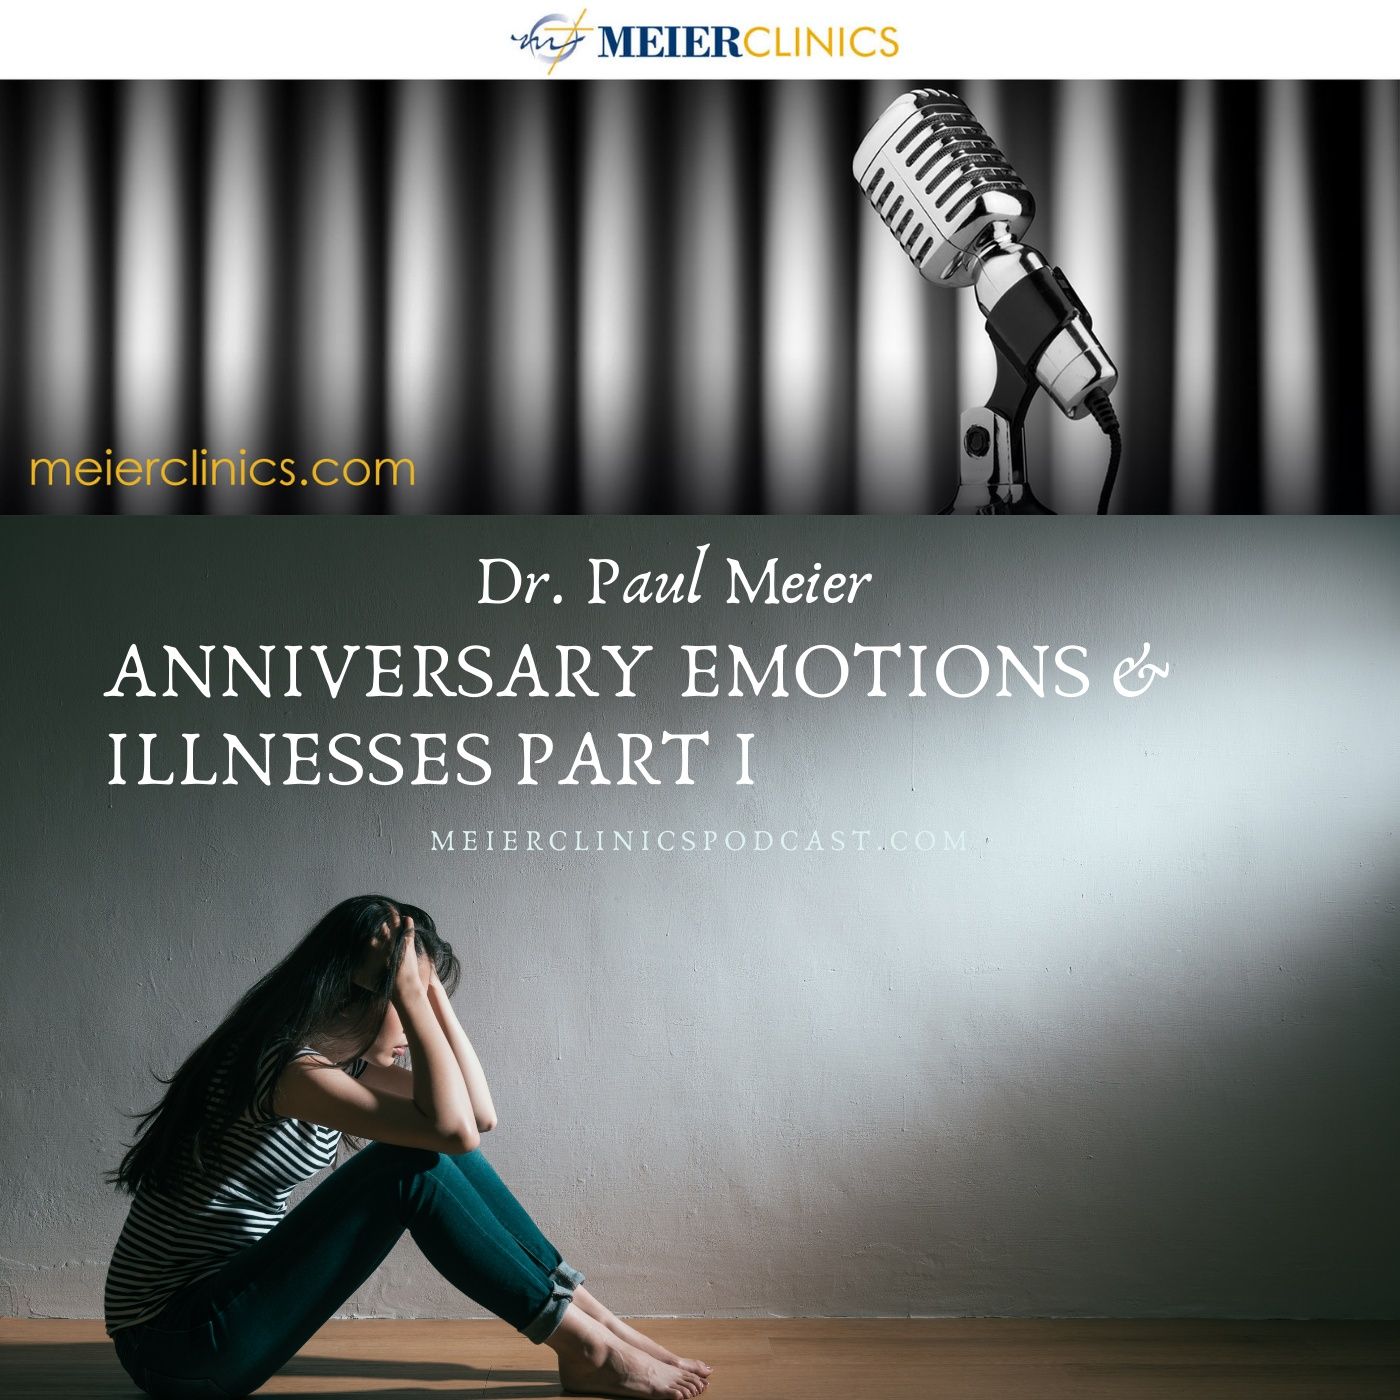 Anniversary Illnesses and Emotions Part 1 with Dr. Paul Meier